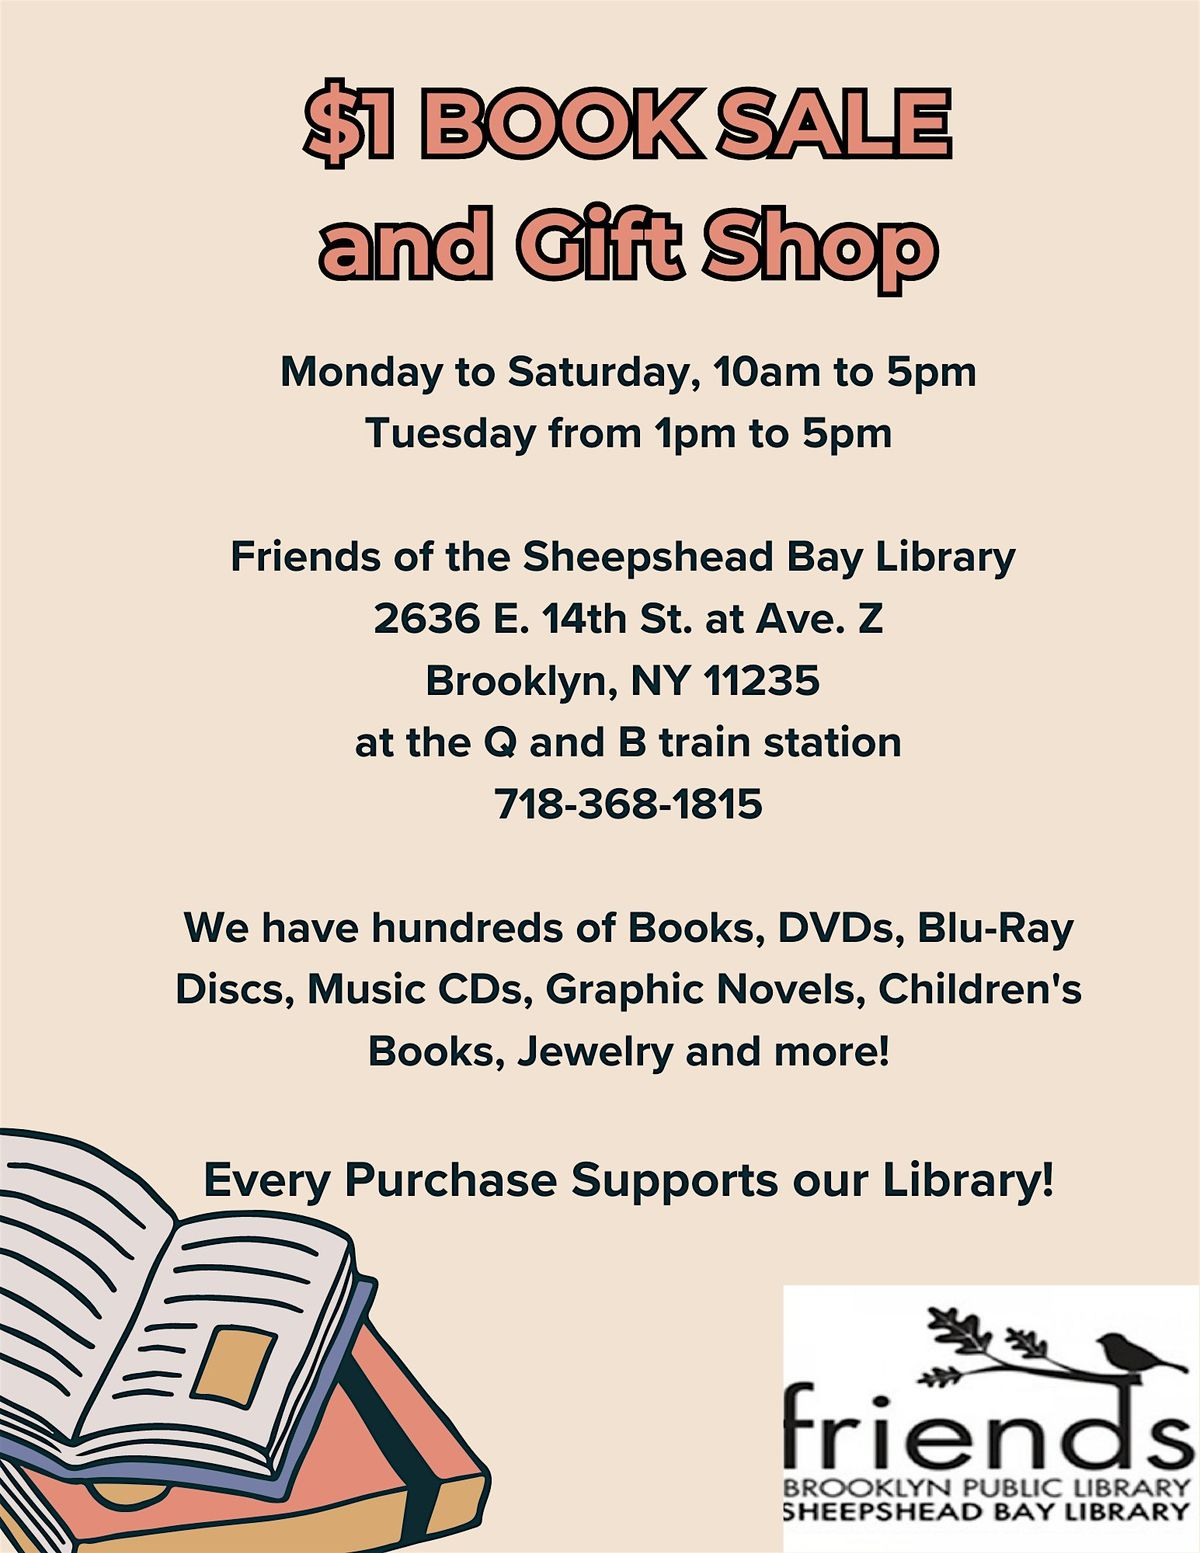 $1 Book Sale and Gift Shop - Every Purchase Supports our Library